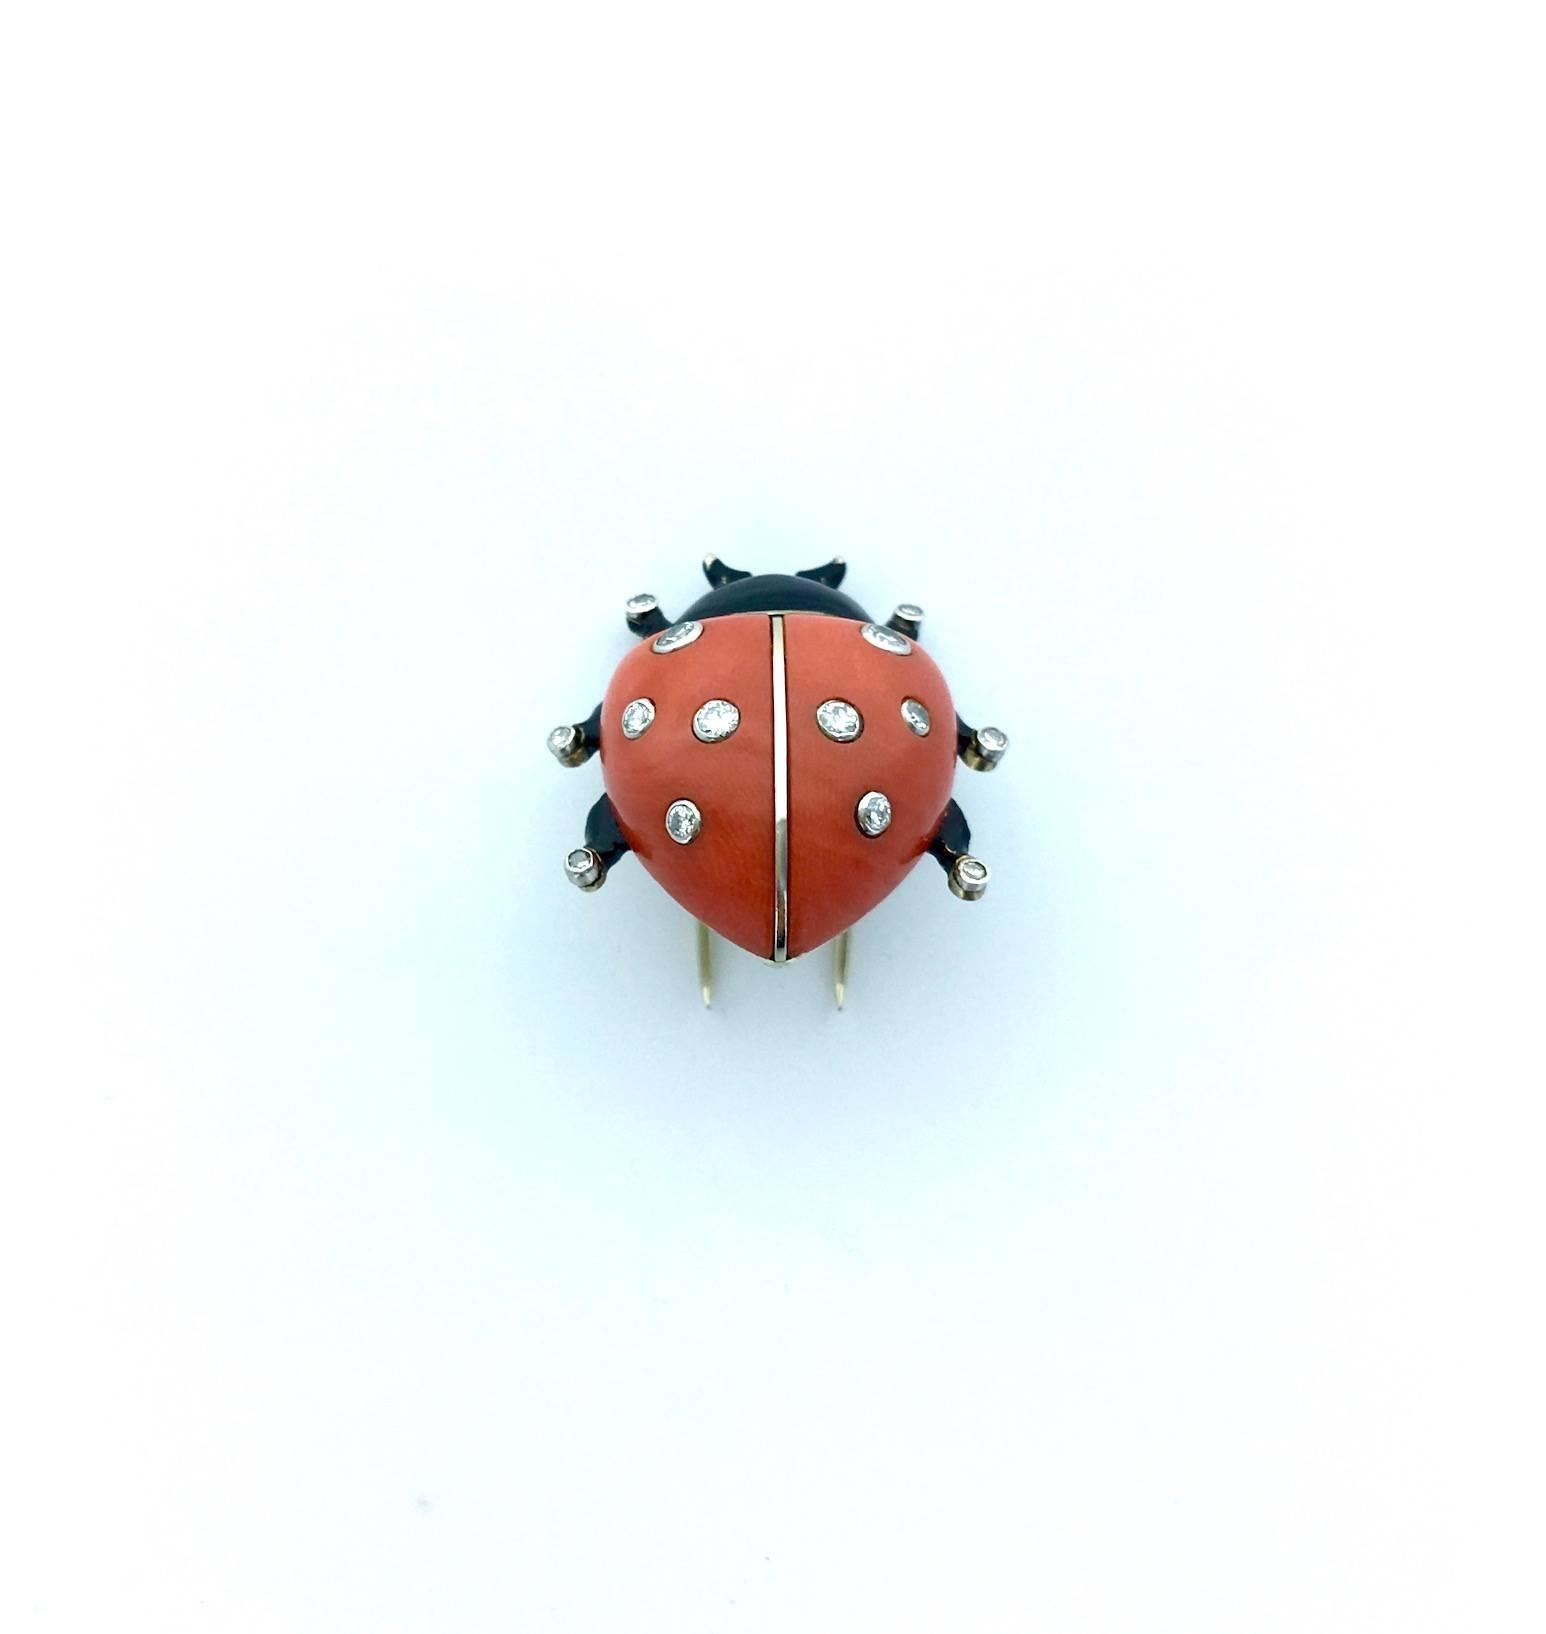 Significant coral, diamond and black lacquer ladybird brooch, signed Cartier Paris, French marks and numbered.
Date: 1936.

Measures:
Height: 3 cm (1.2 inches)
Width: 2.5 cm (1 inch)
Thickness: 2.5 cm (1 inch)

Provenance: Former Collection of